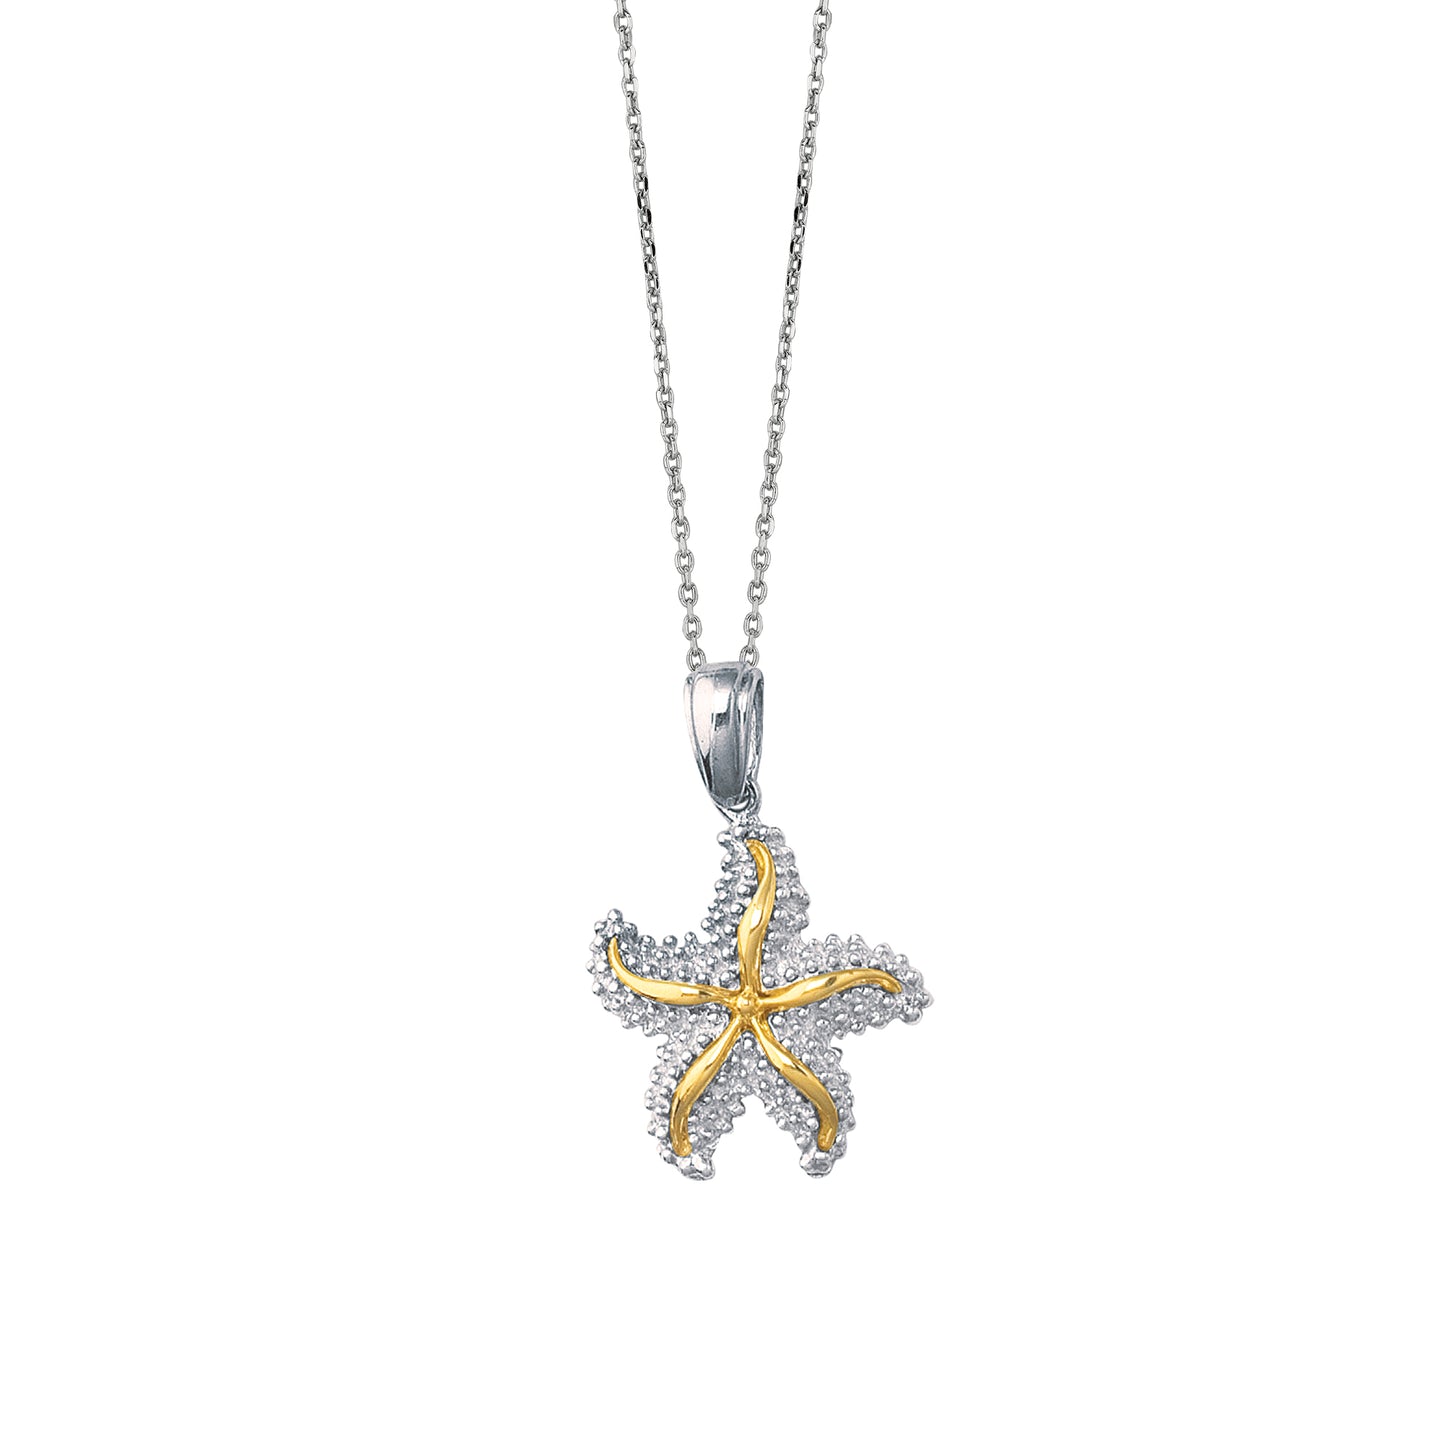 14K & Silver Star Fish Necklace